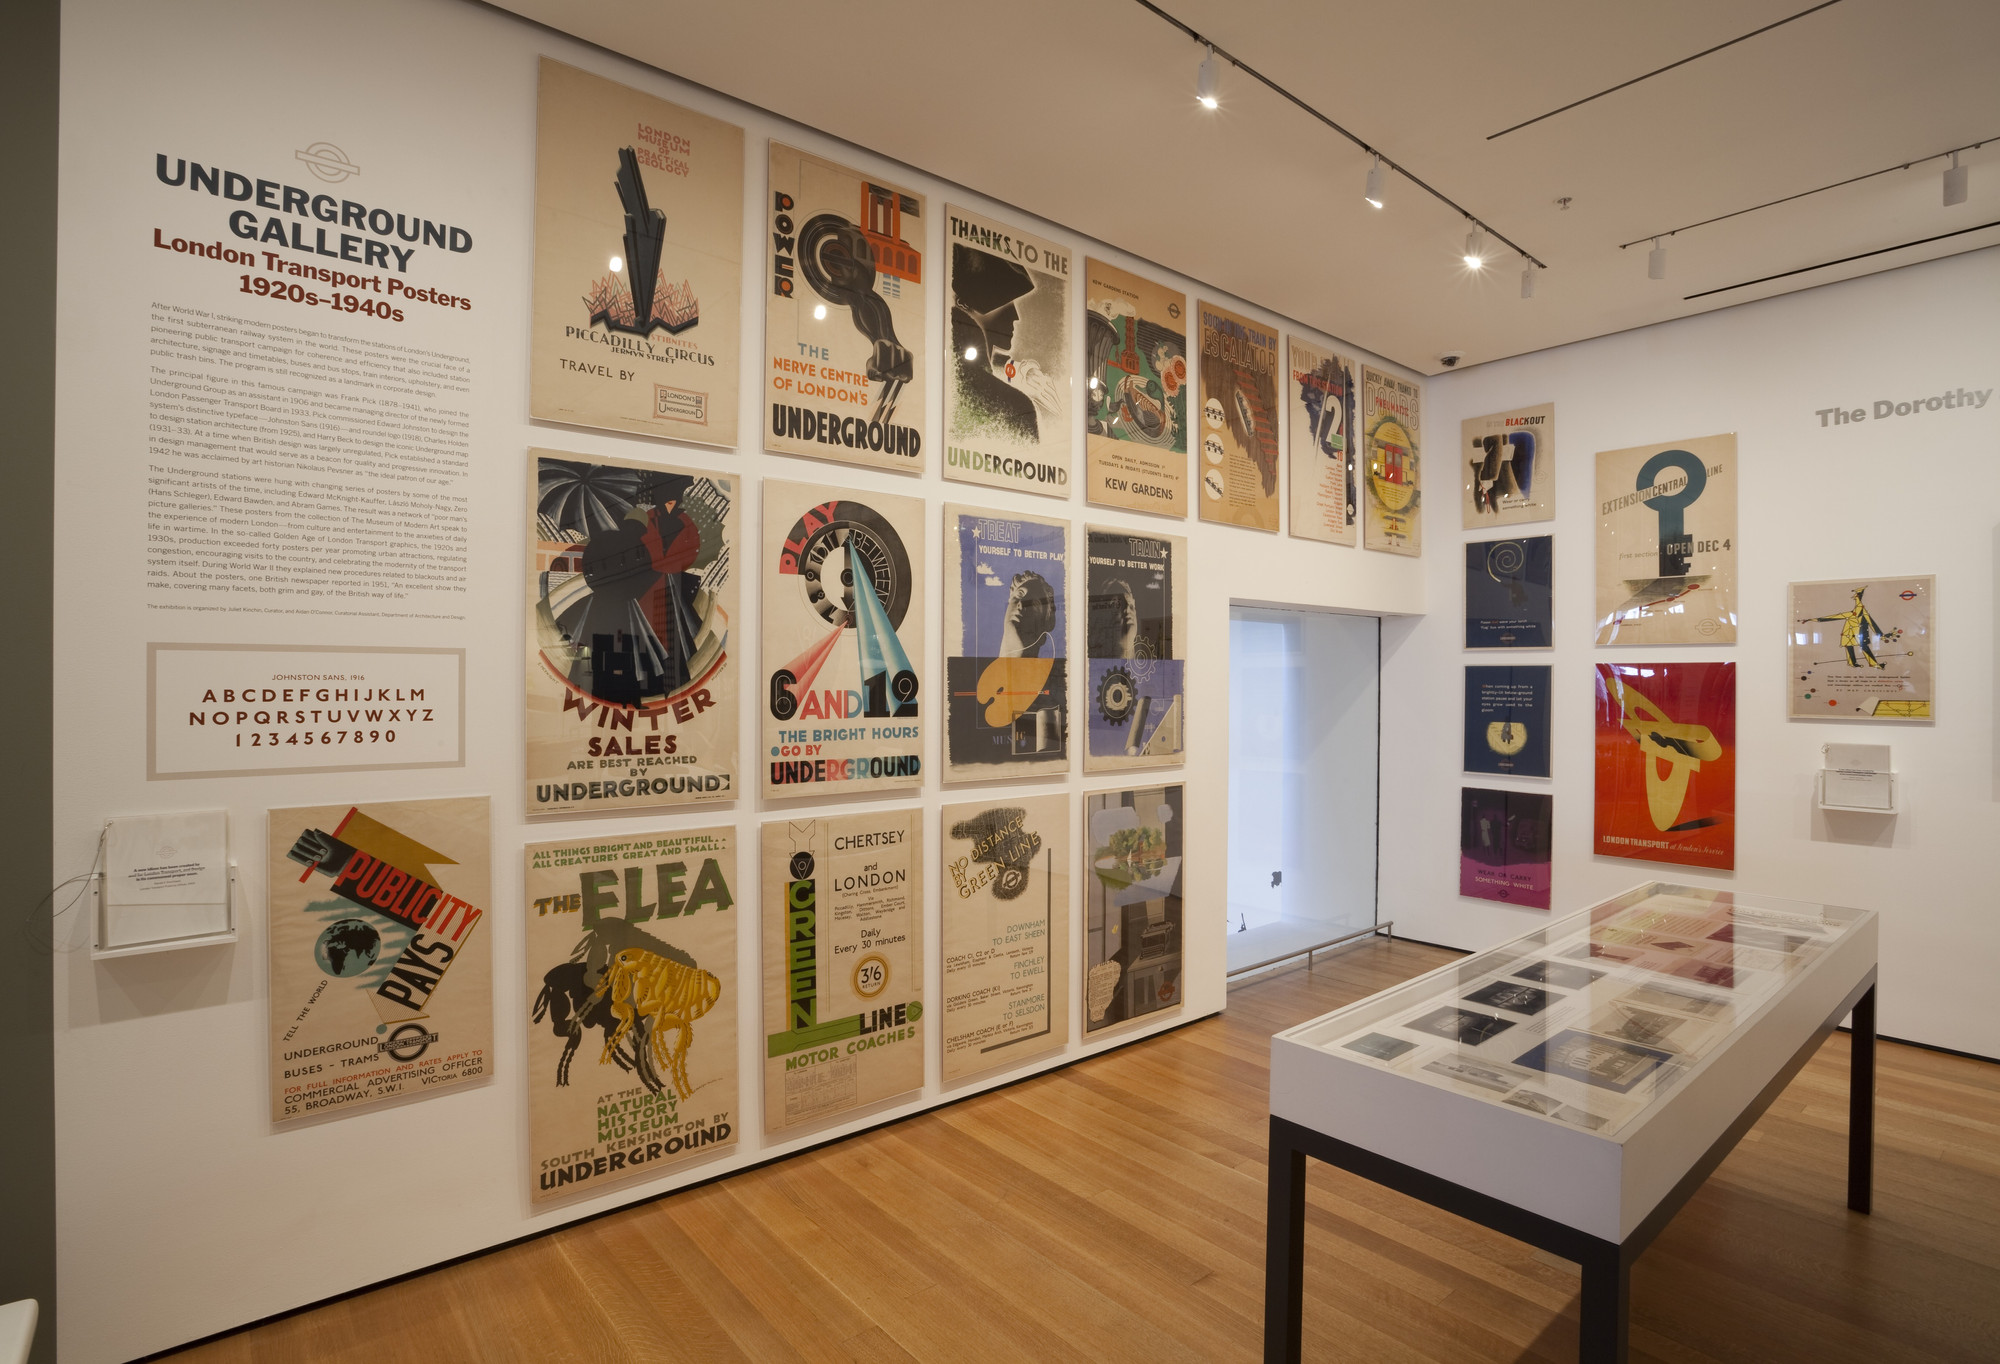 efter skole vrede dusin Installation view of the exhibition, "Underground Gallery: London Transport  Posters, 1920s-1940s" | MoMA